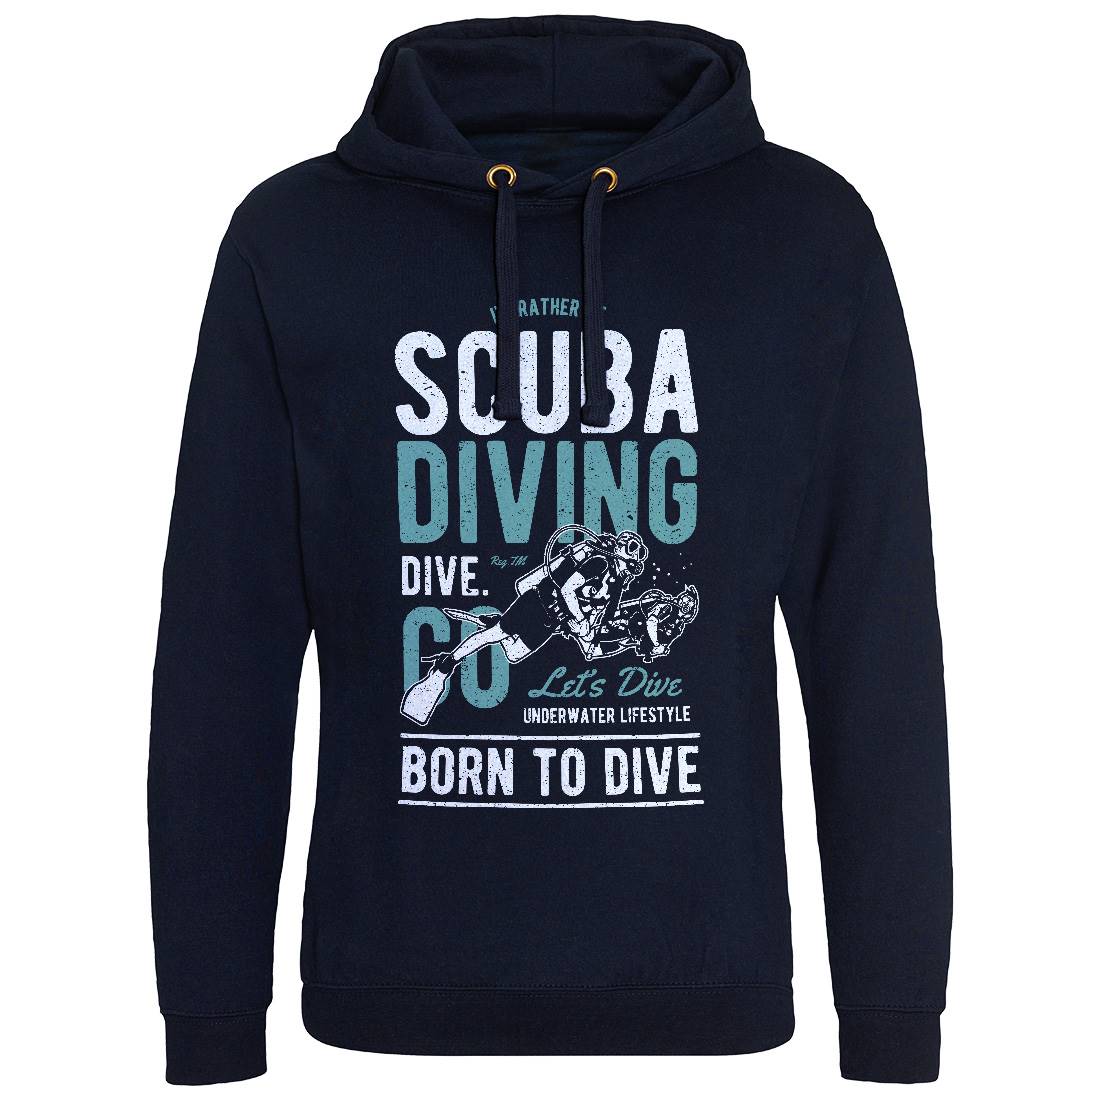 Scuba Diving Mens Hoodie Without Pocket Sport A752